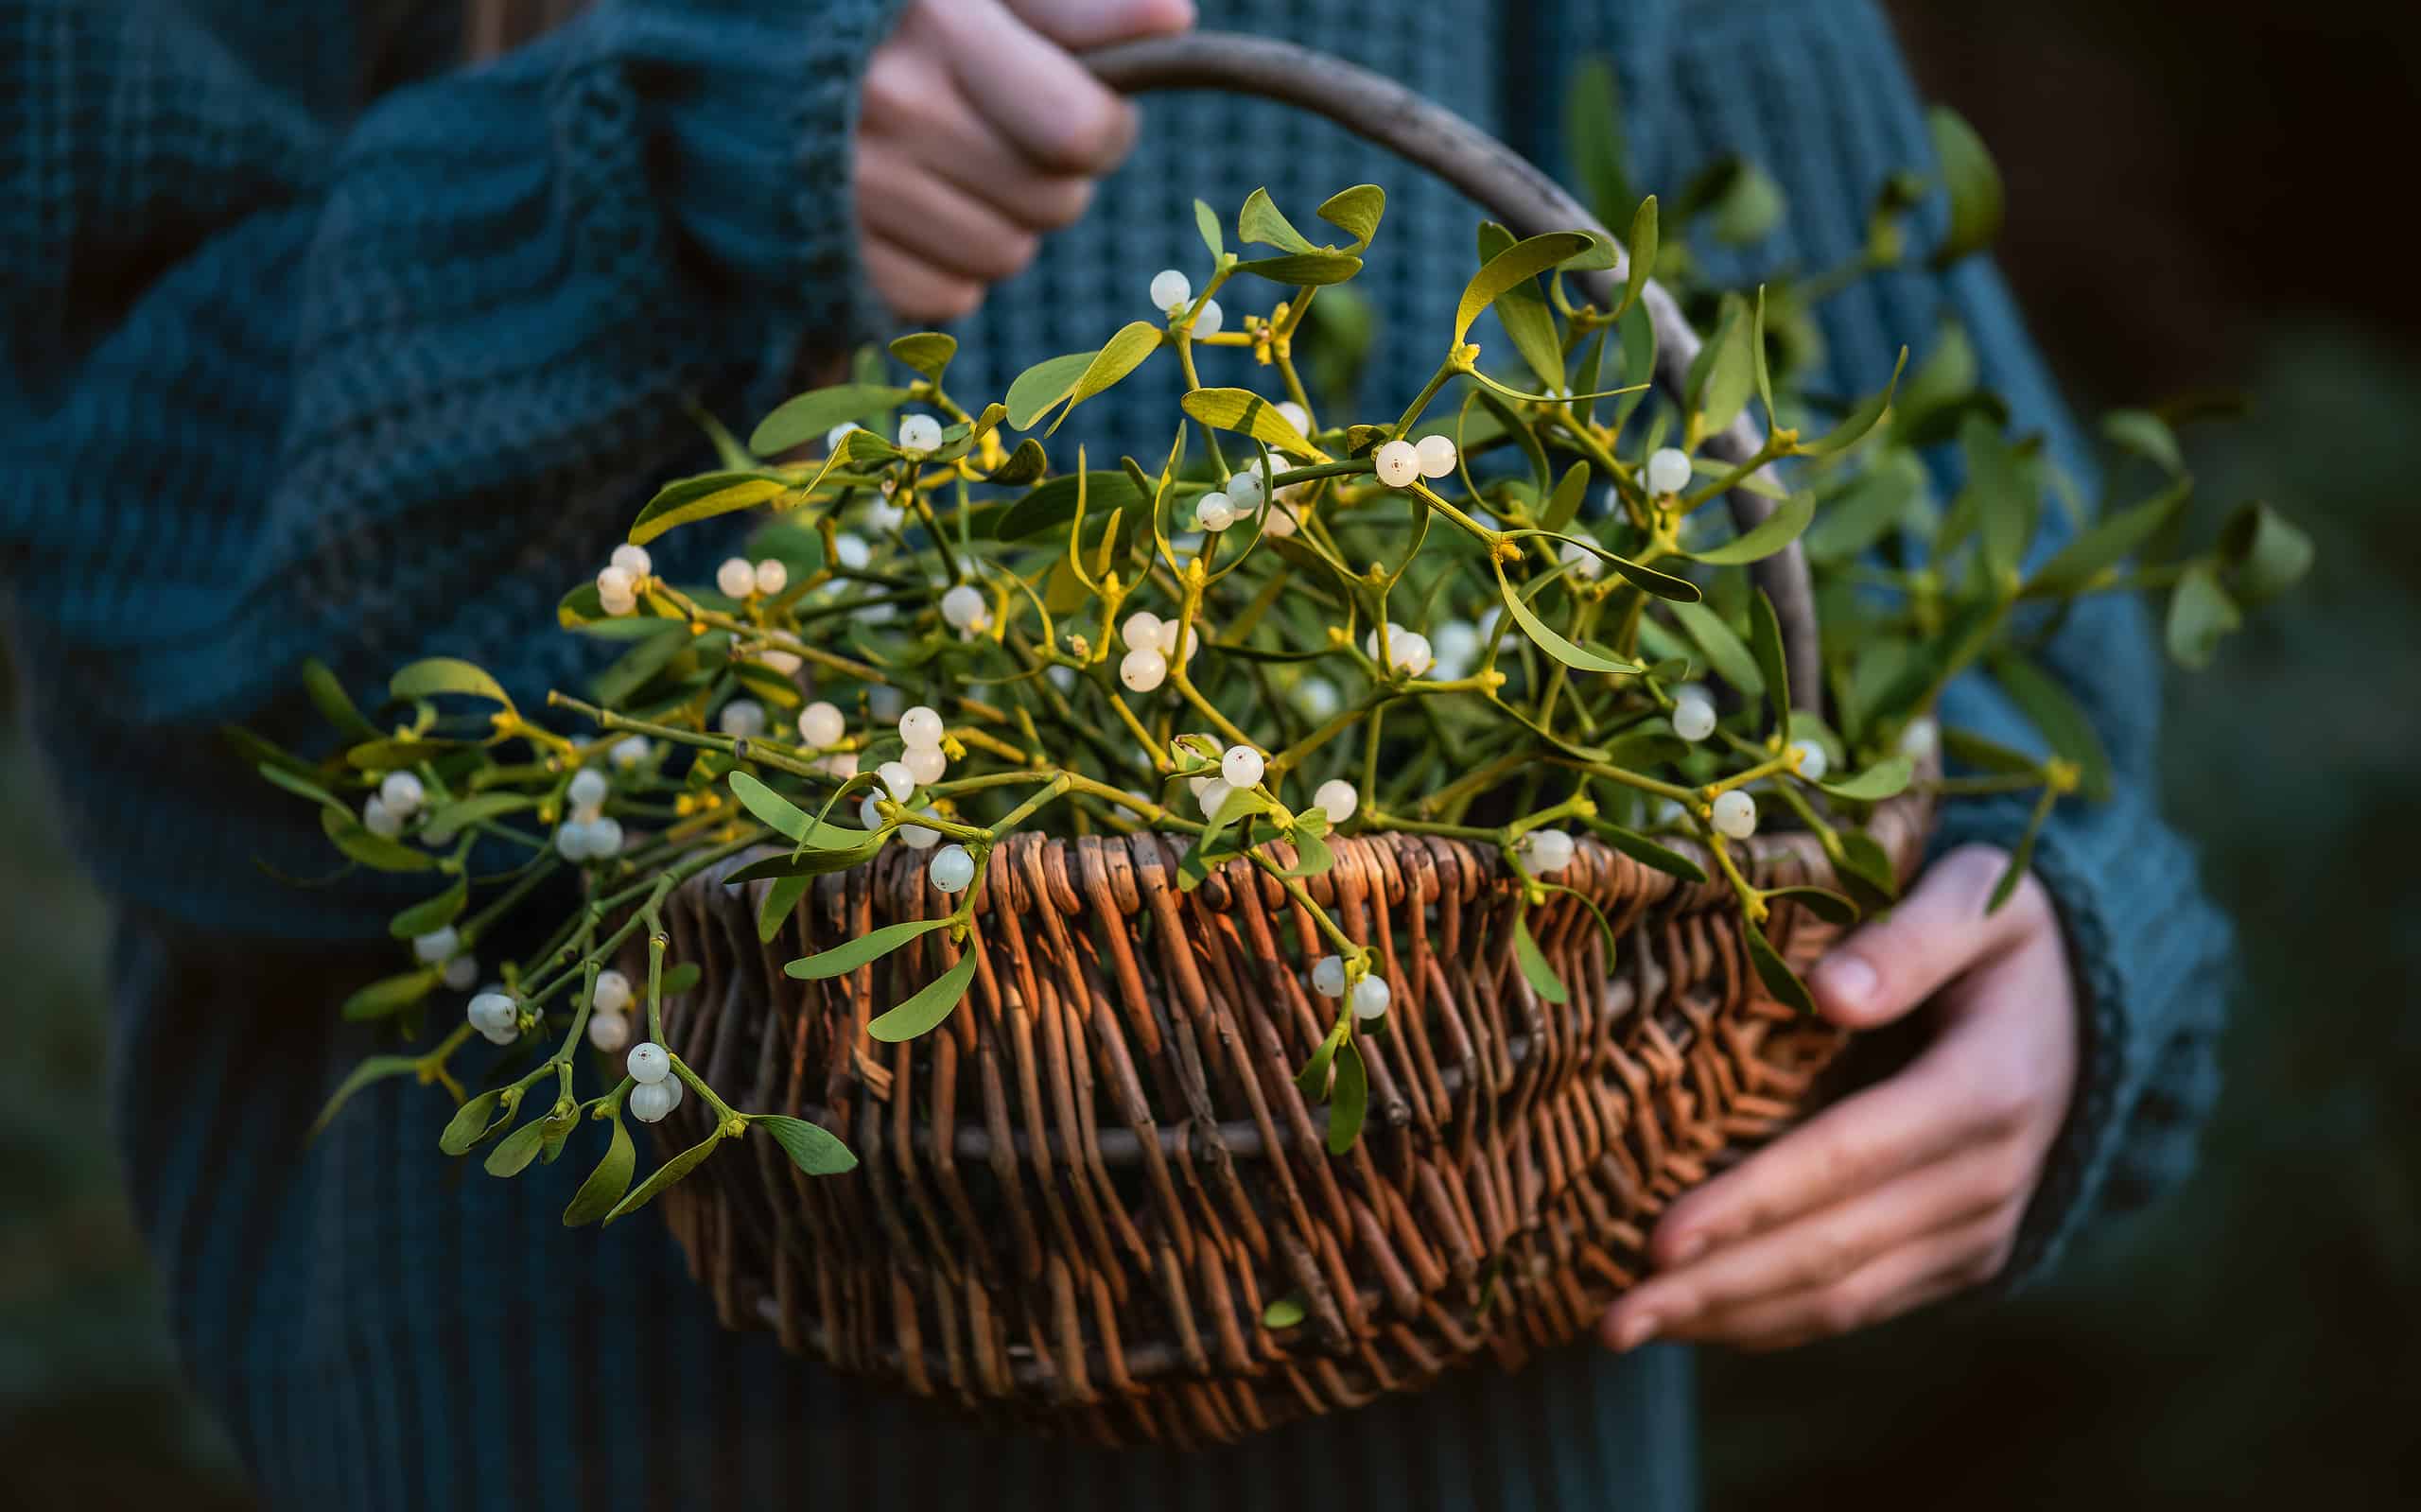 Young girl holding a wicker basket with mistletoe branches with green leaves and white berries.